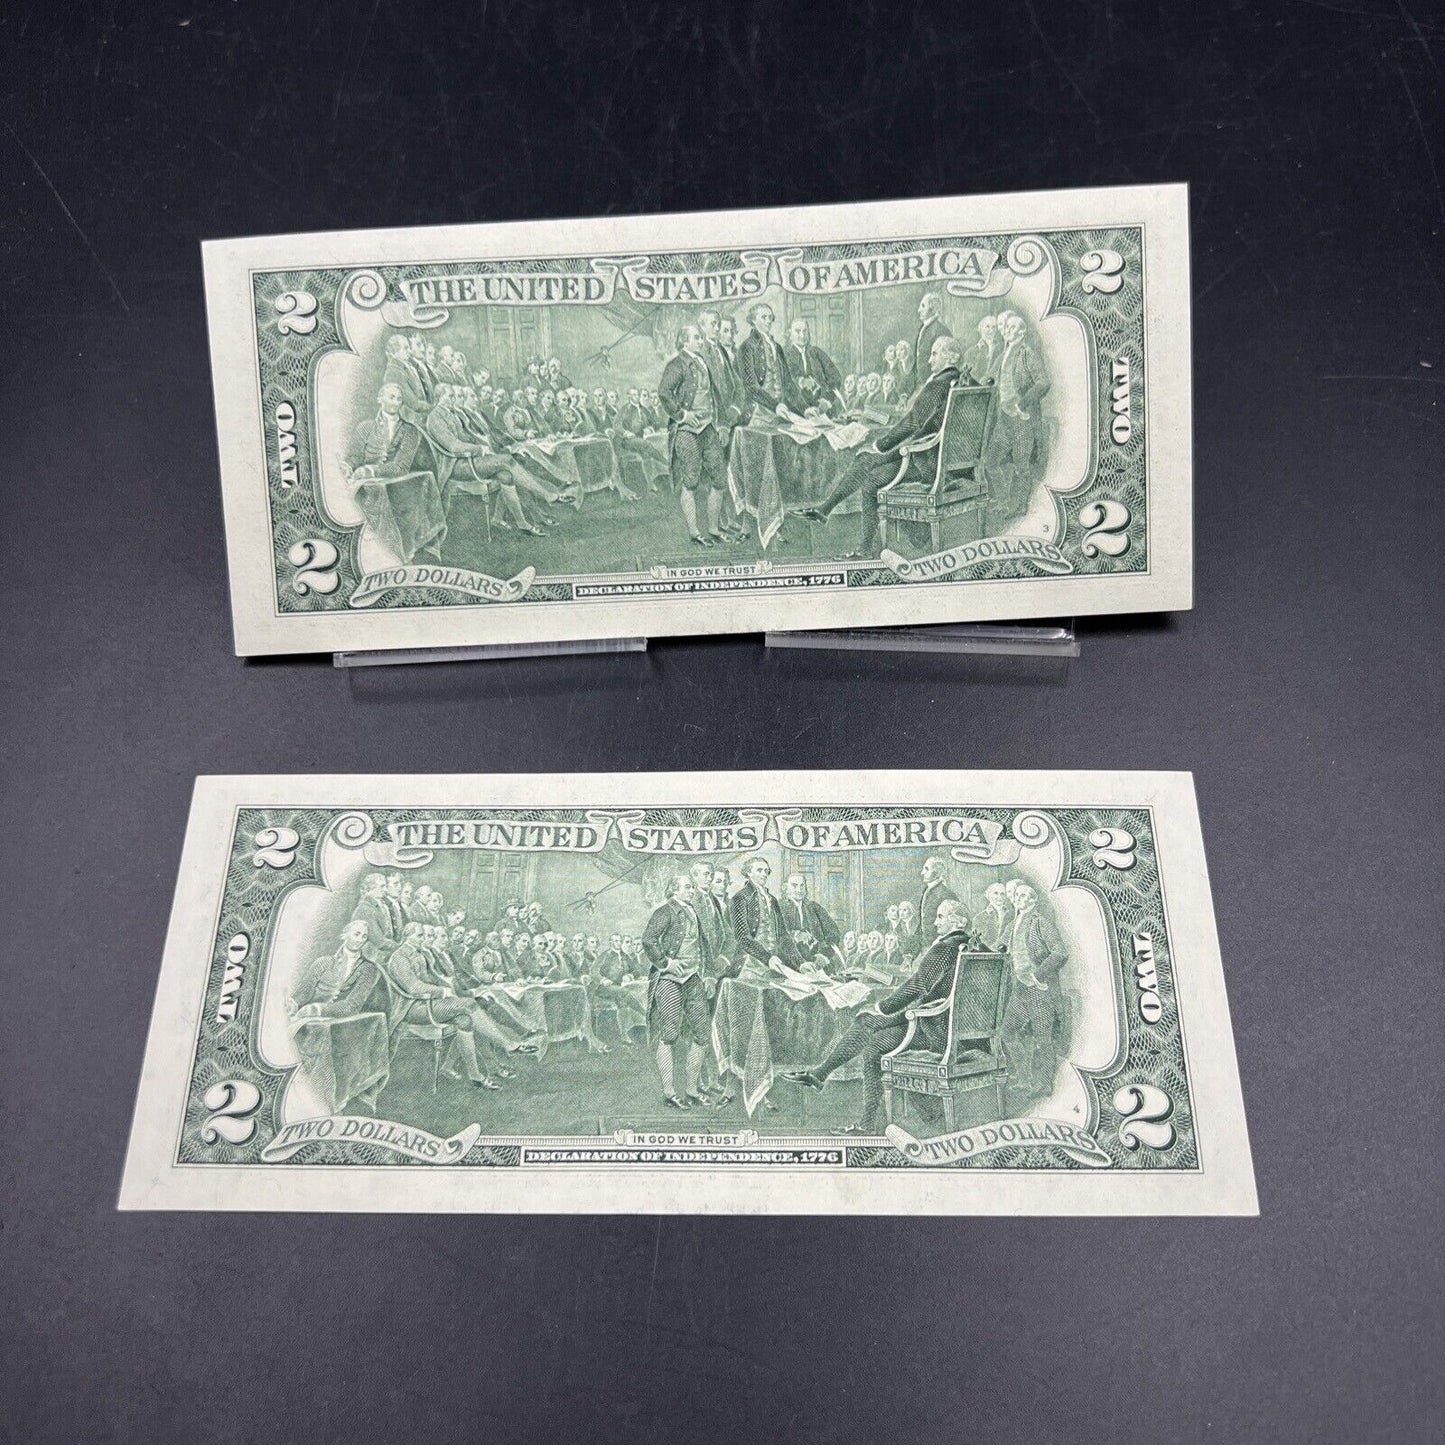 Lot of 2 2003 $2 Two Dollar FRN Federal Reserve Note Bills NEAT Serial #881